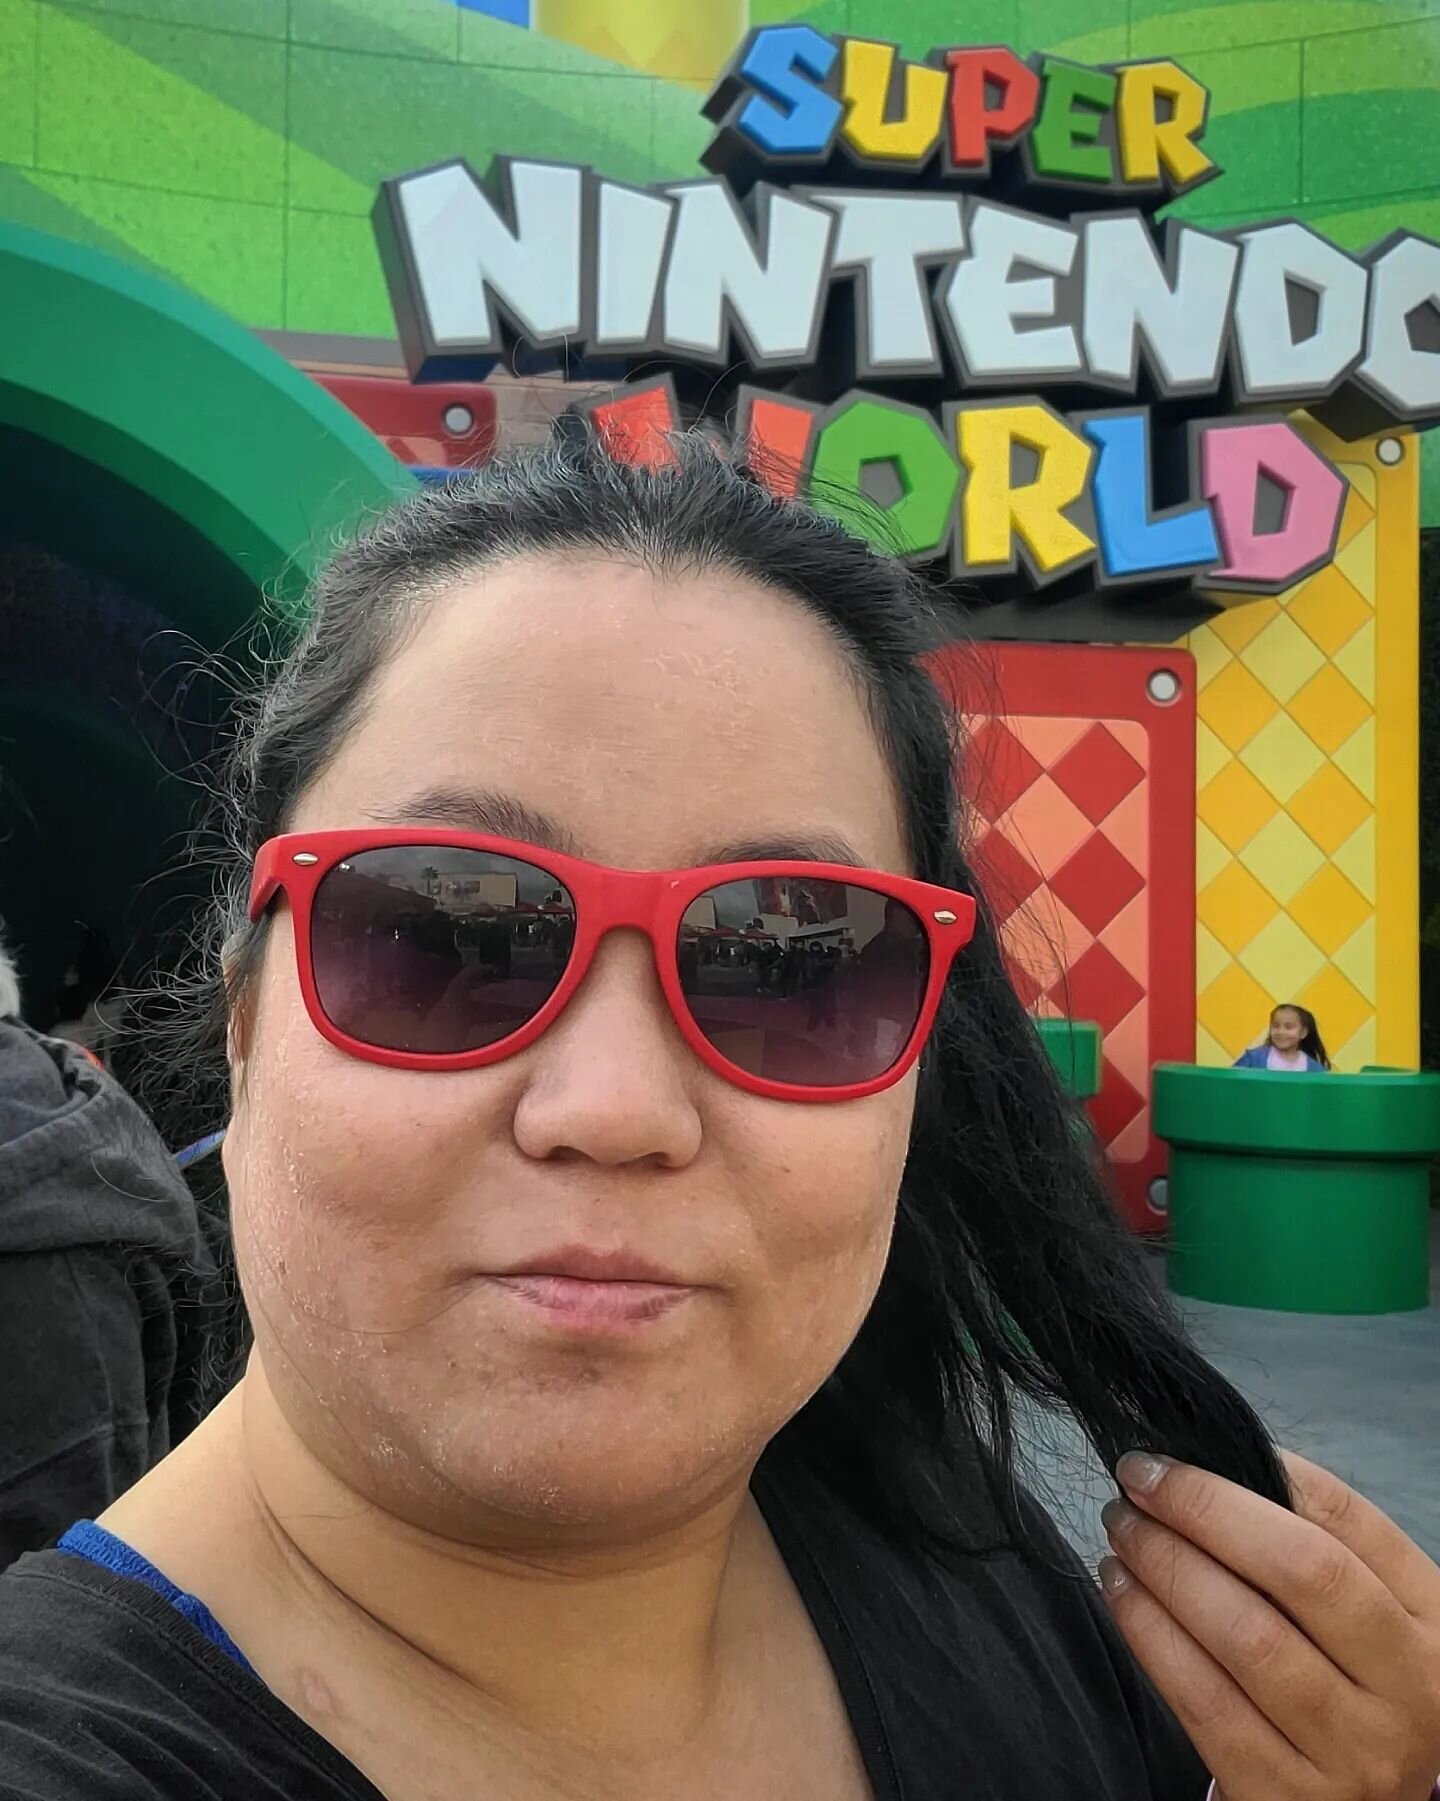 New section is small but cute! The Mario Kart ride is really fun tho. Best way to pass the time while waiting for my red-eye back to NYC #supernintendoworld #universalstudioshollywood #marioworld